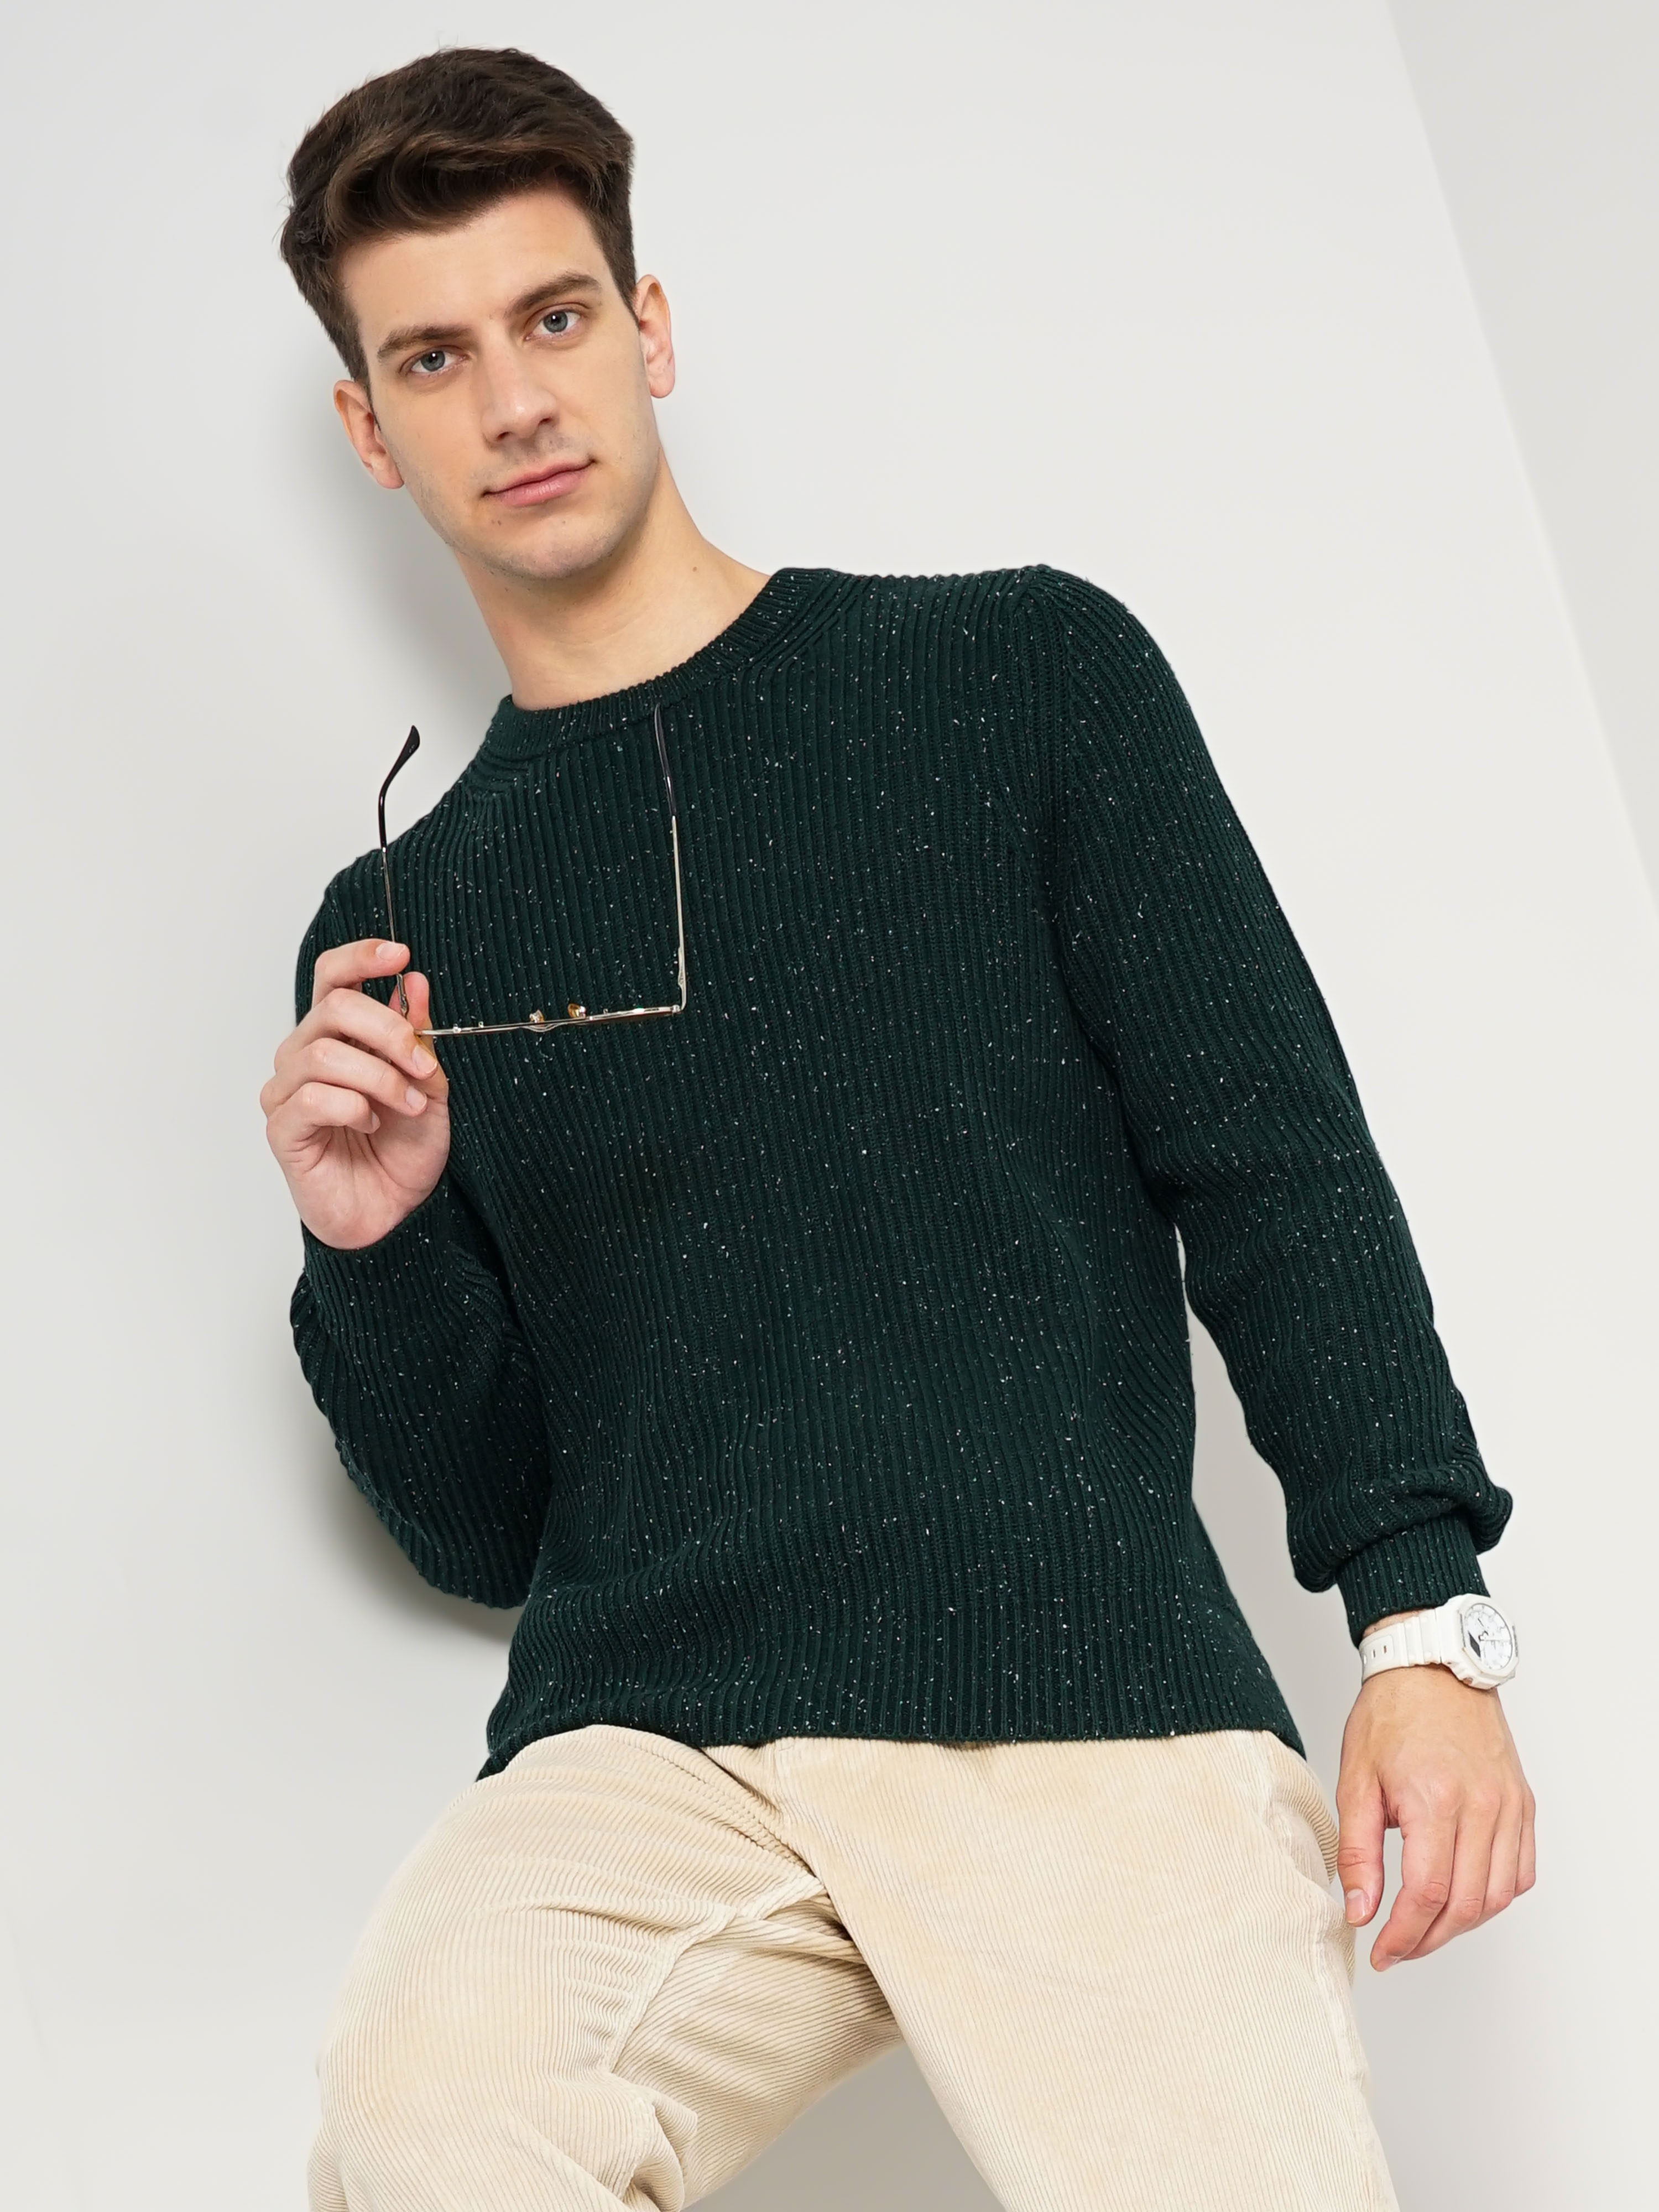 Men's Green Knitted Sweaters